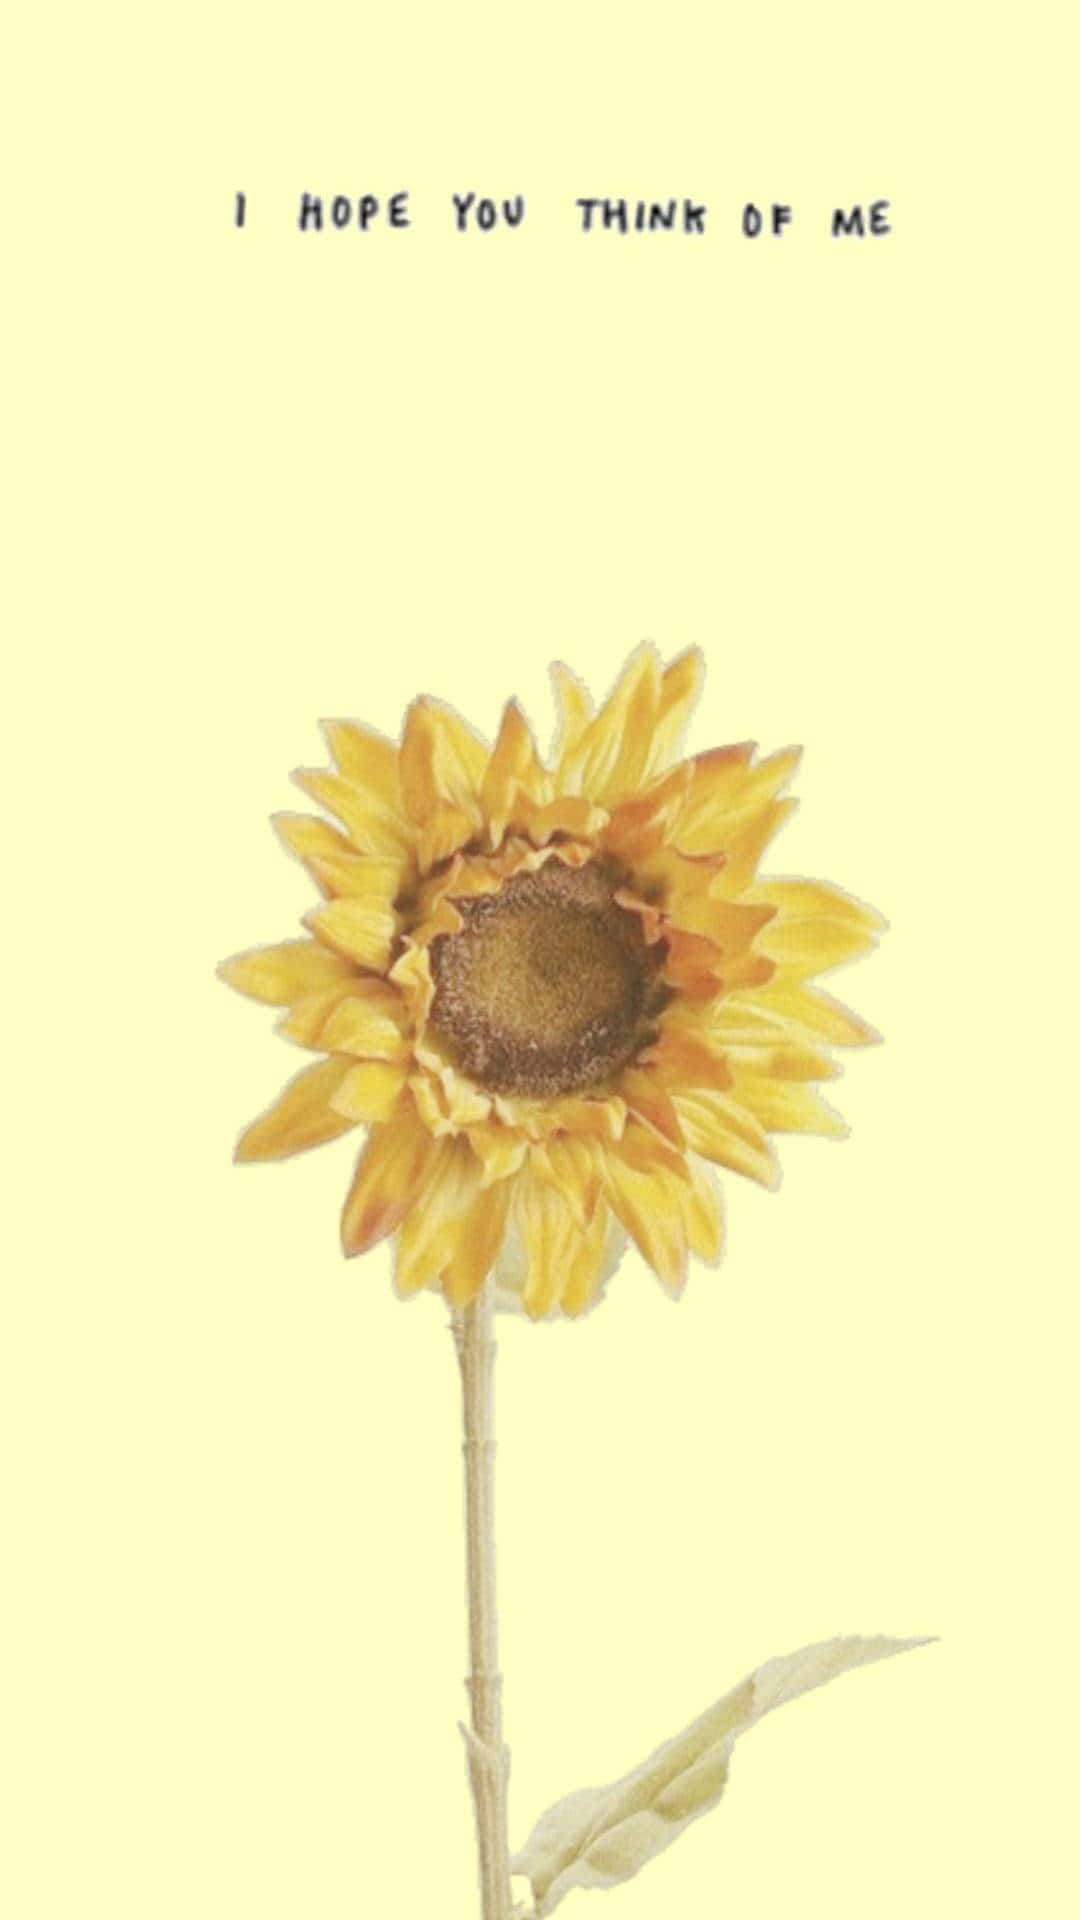 Brighten up your day with this beautiful sunflower aesthetic iPhone wallpaper Wallpaper